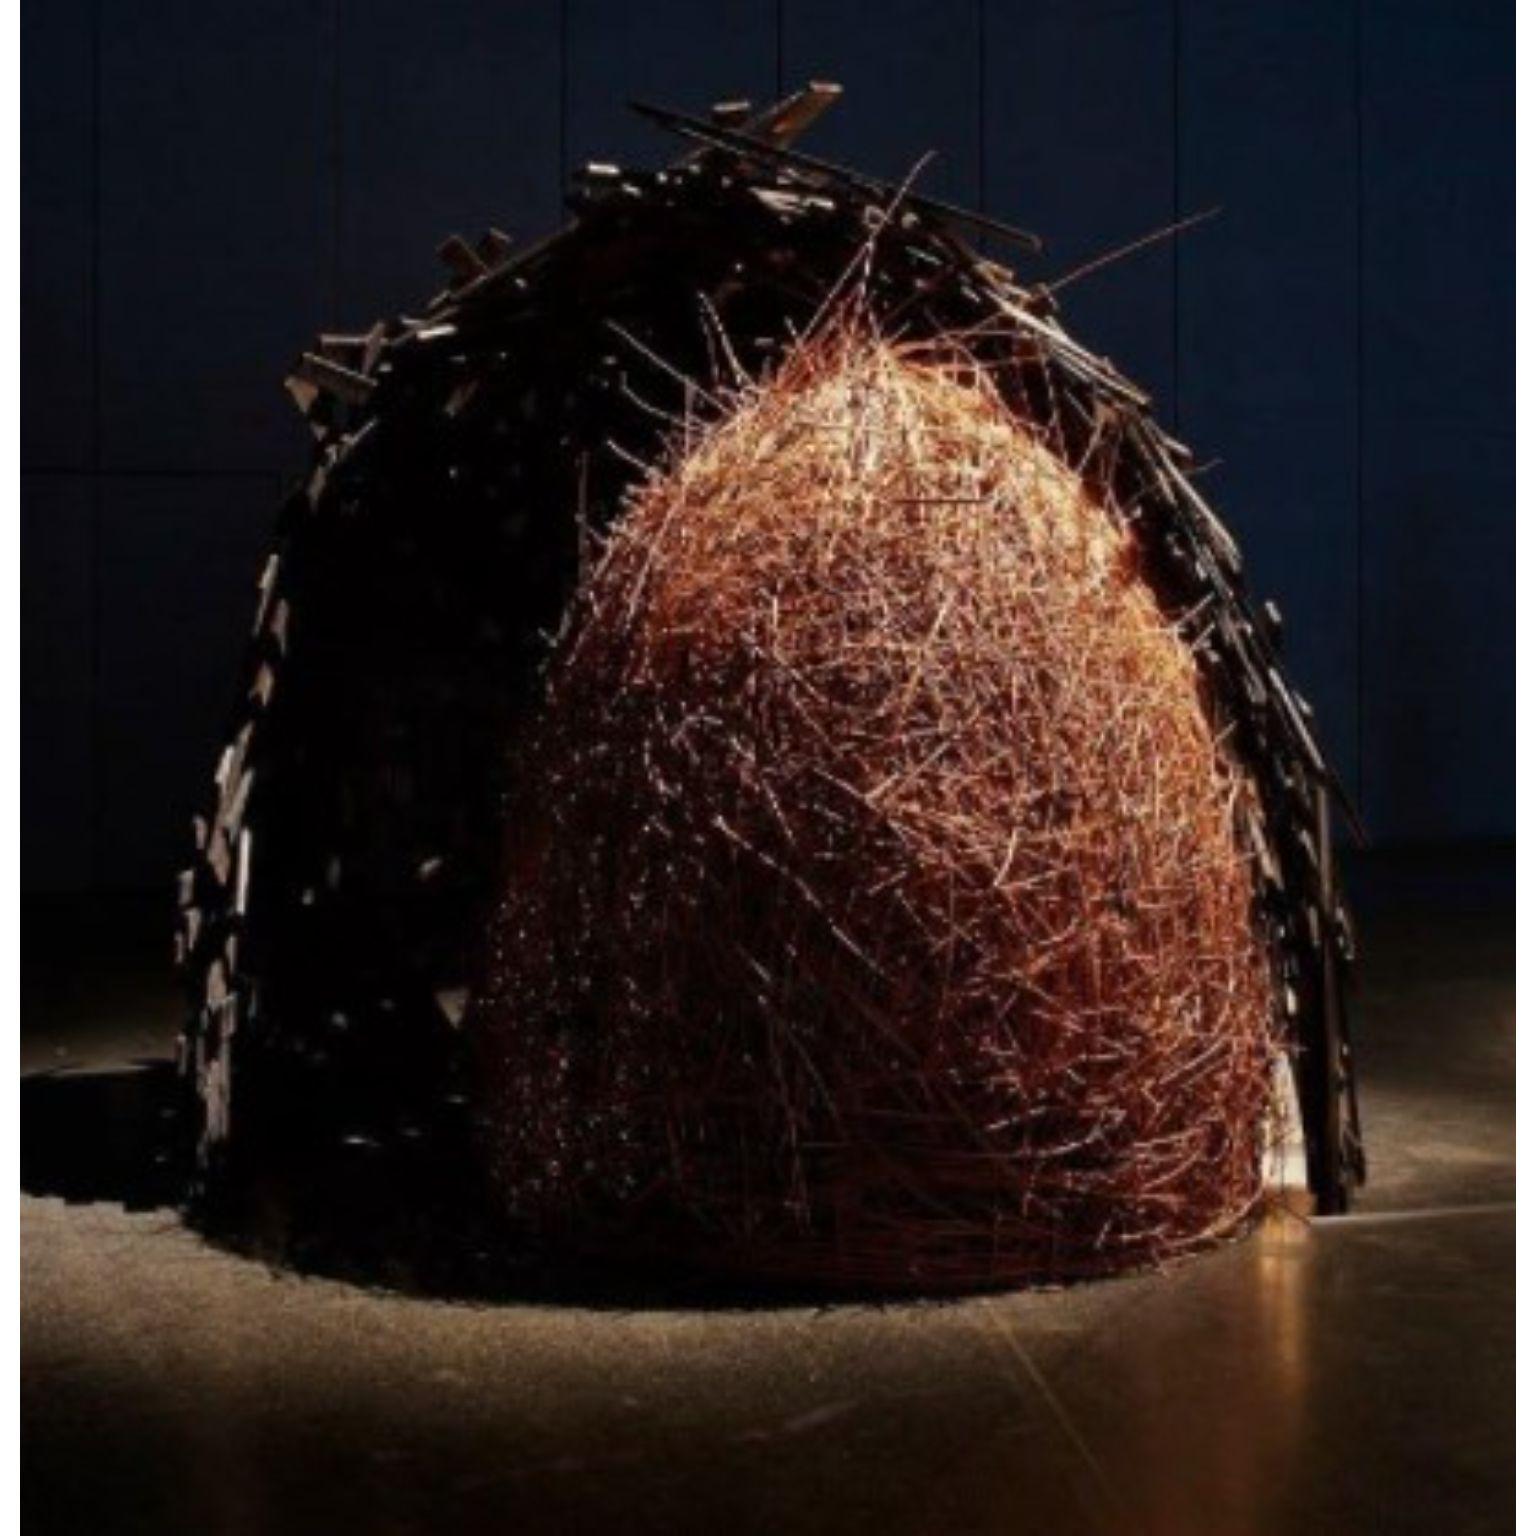 João do Pau Nest wall separating + sculpture by Mameluca
Material: Vime Branches, Pallets, others
Dimensions: D 300x H 250 cm

Birds build huge nests with twigs (reason of common name). Twigs are relatively large for bird size. The couple acts